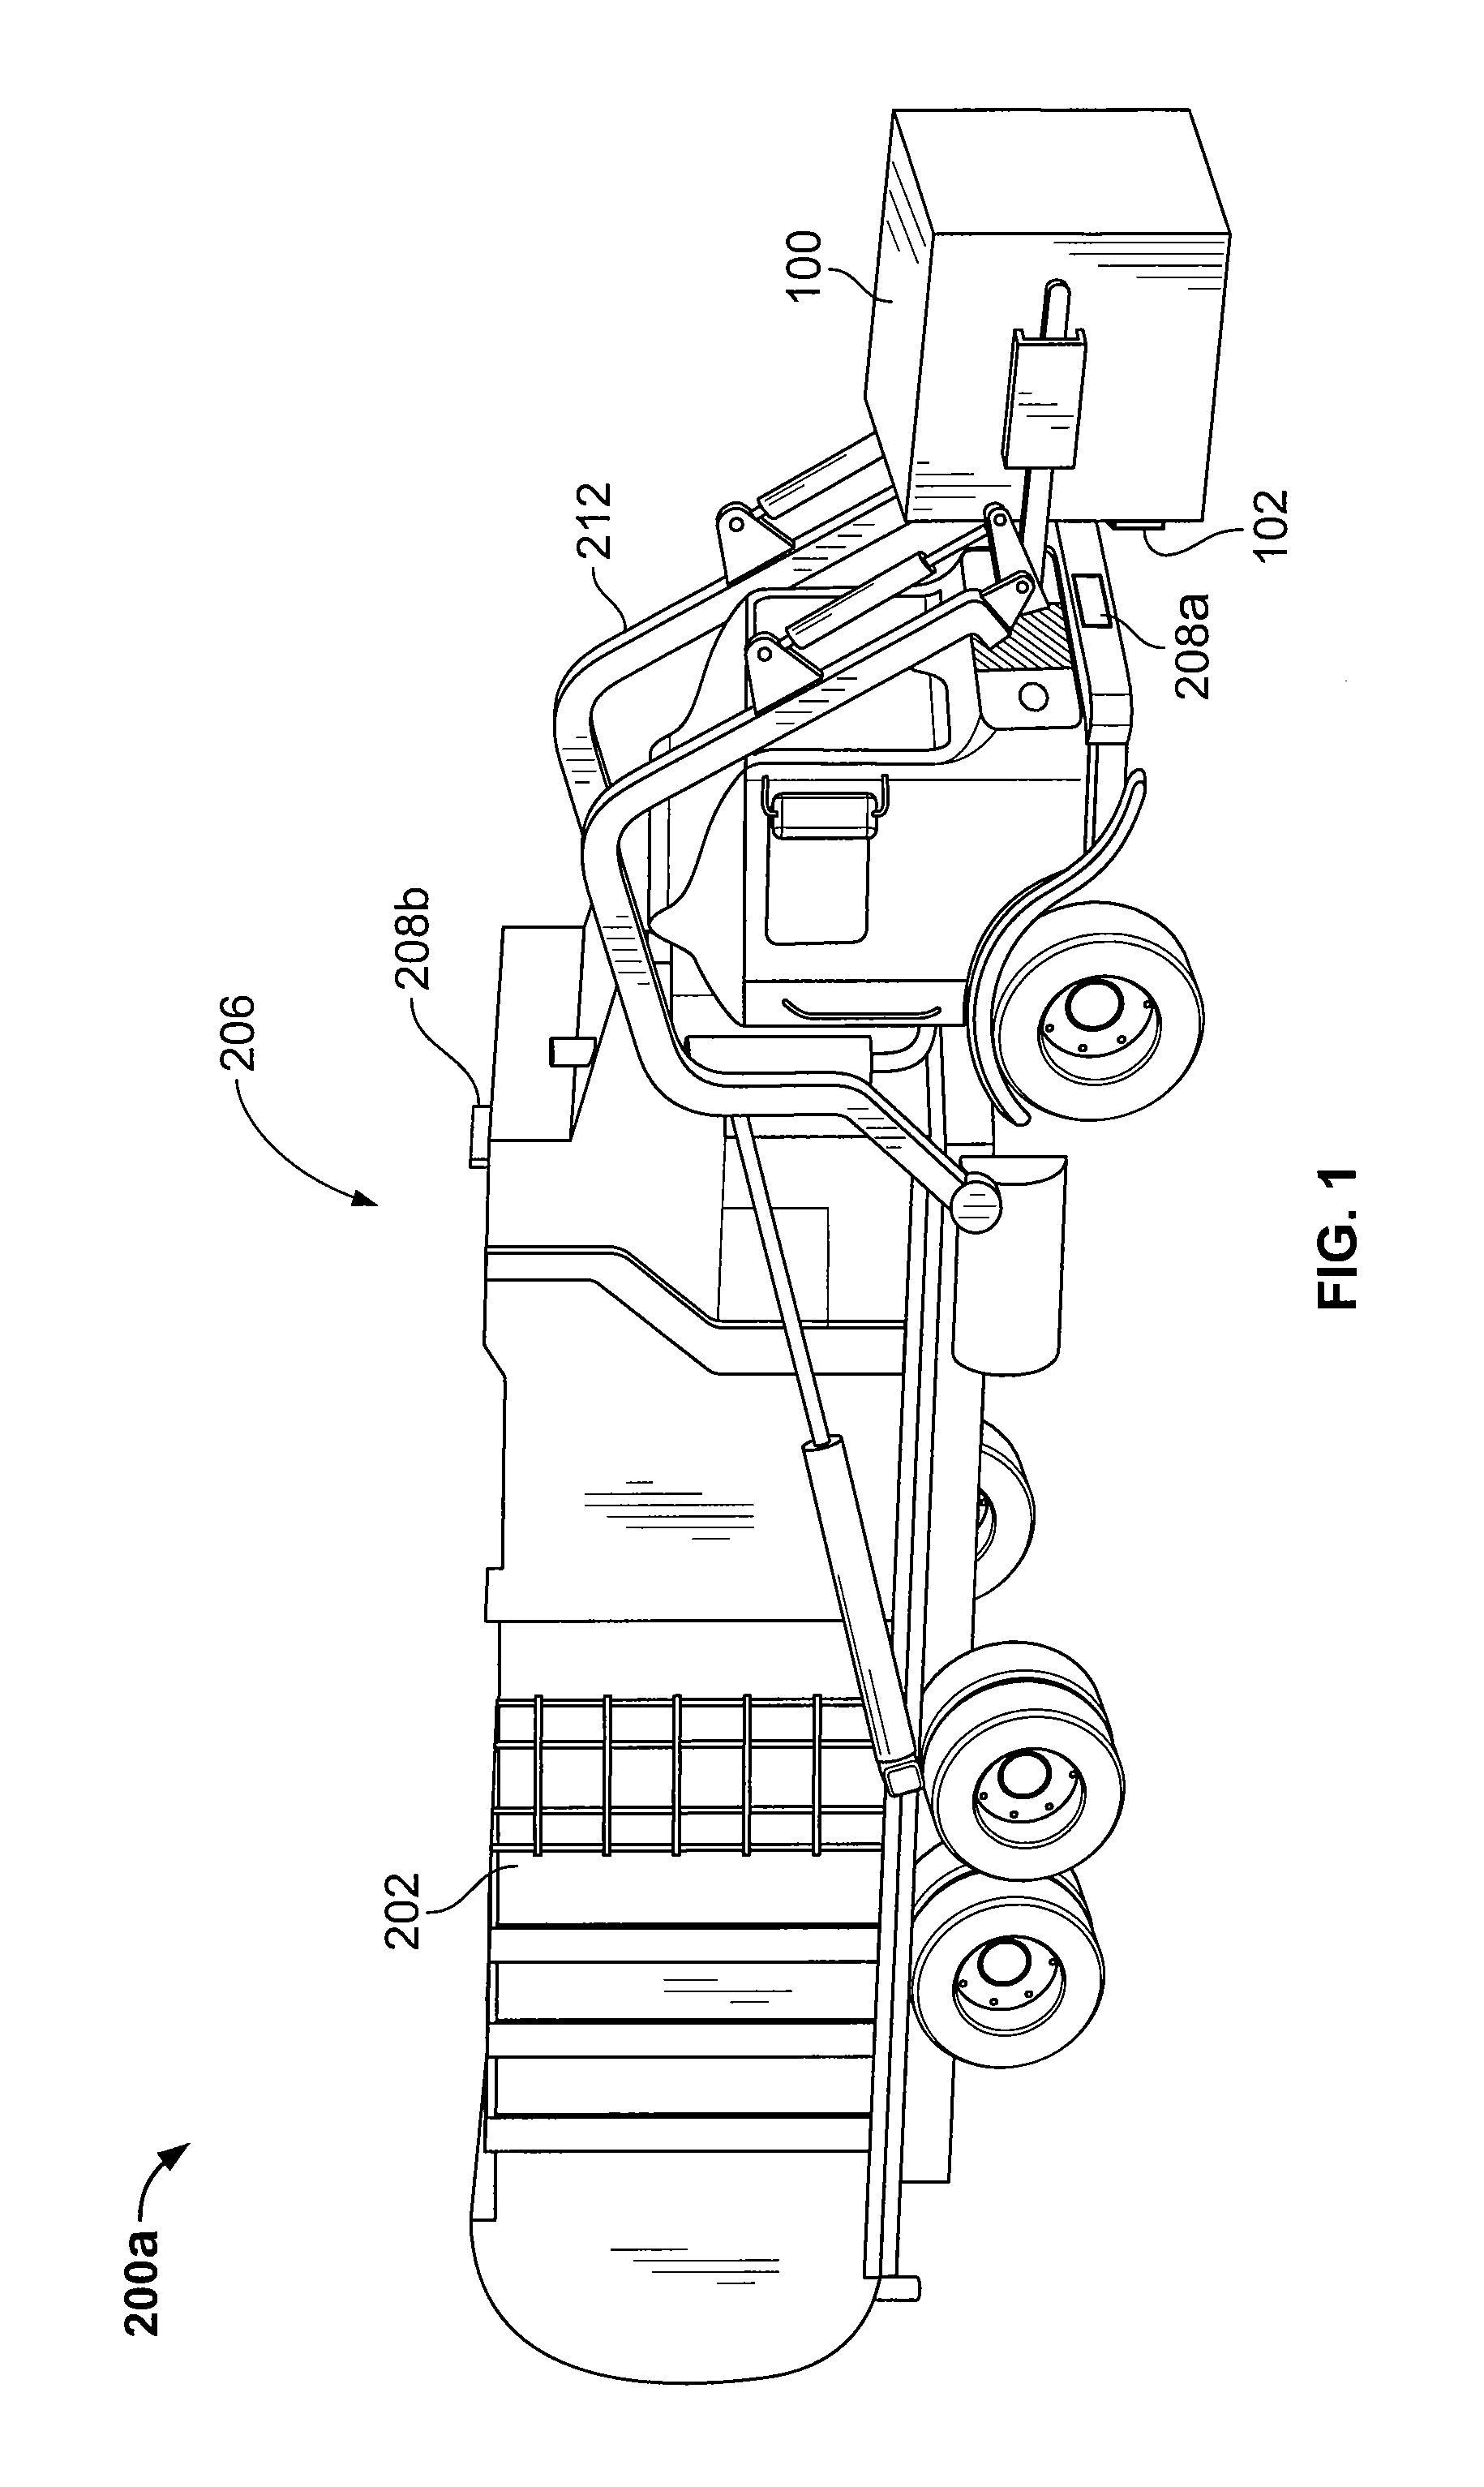 Method and apparatus for waste removing and hauling